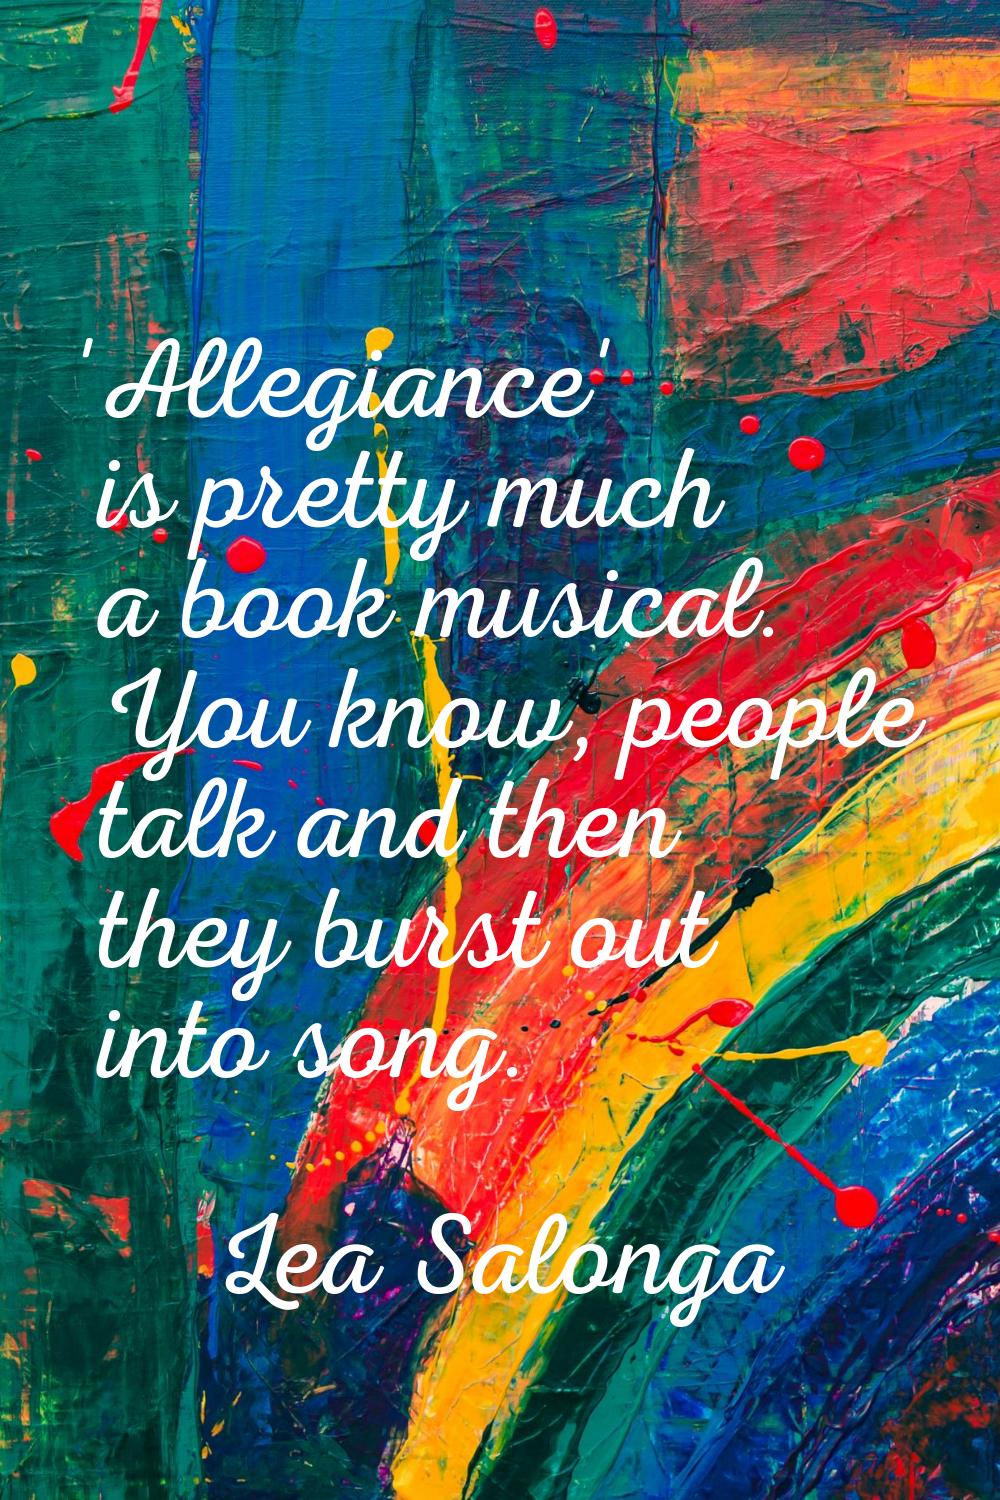 'Allegiance' is pretty much a book musical. You know, people talk and then they burst out into song